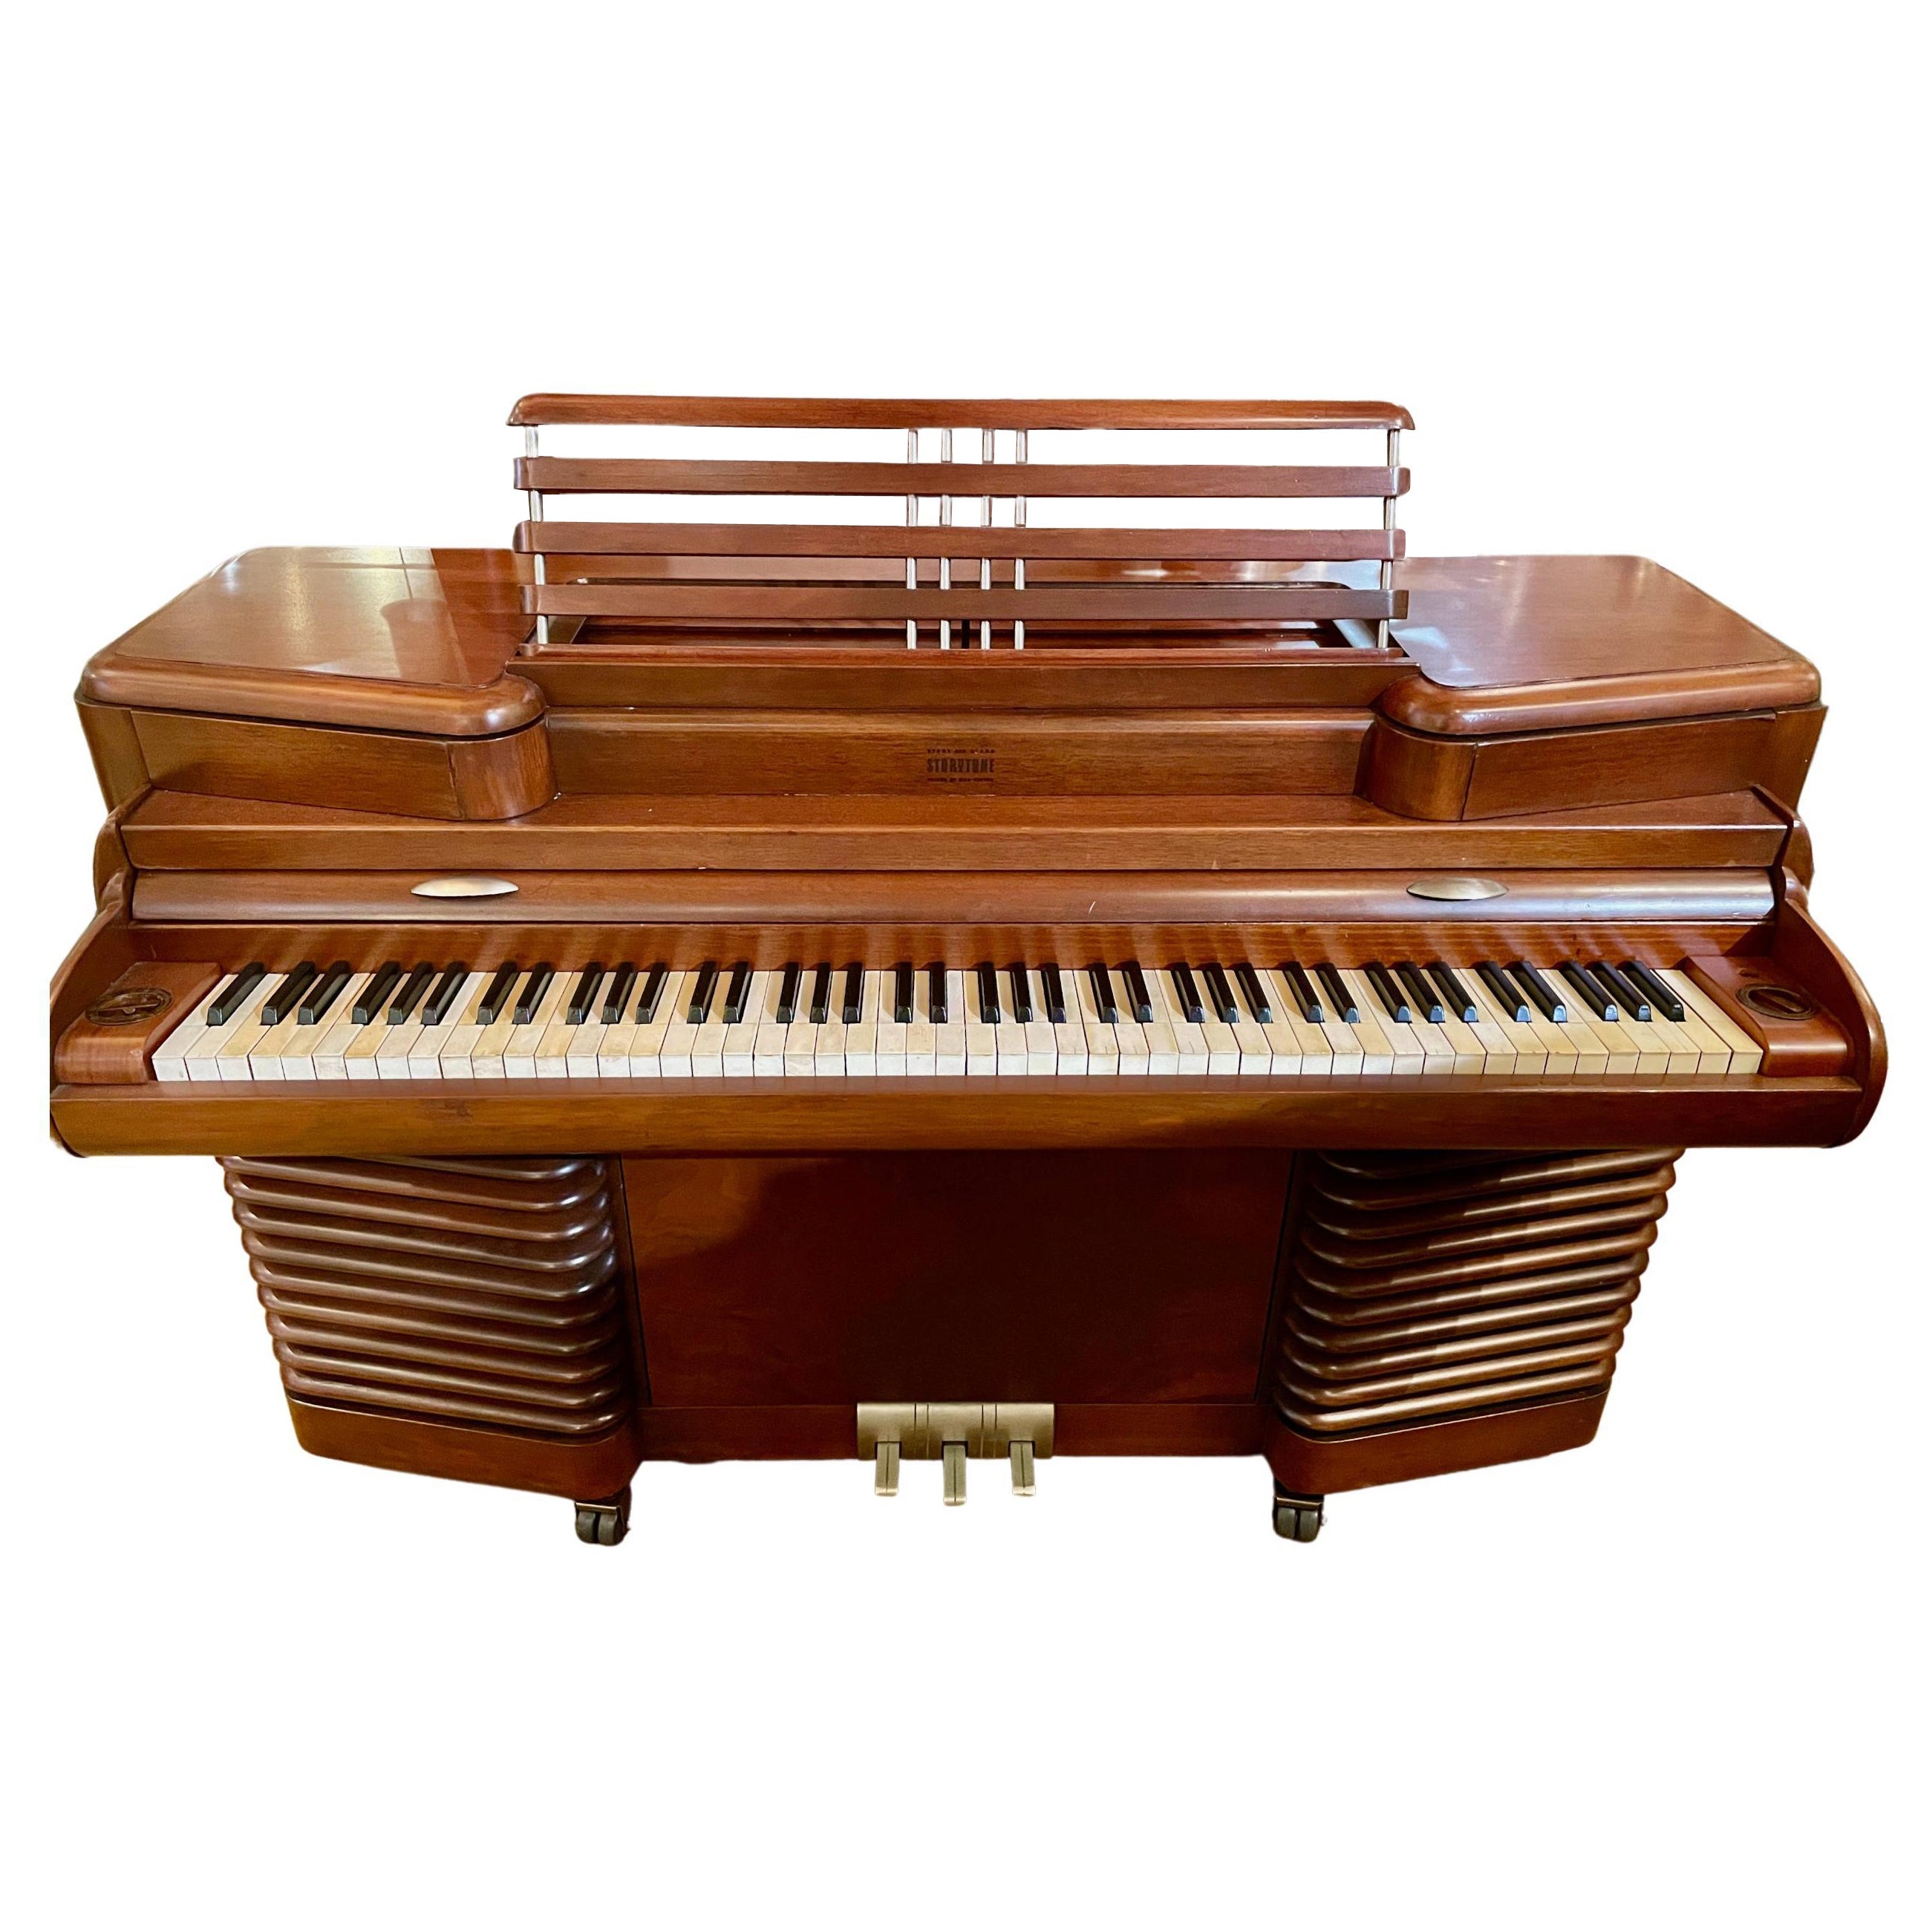 1939 Art Deco Original Story & Clark "Storytone" Electric Piano and Bench For Sale